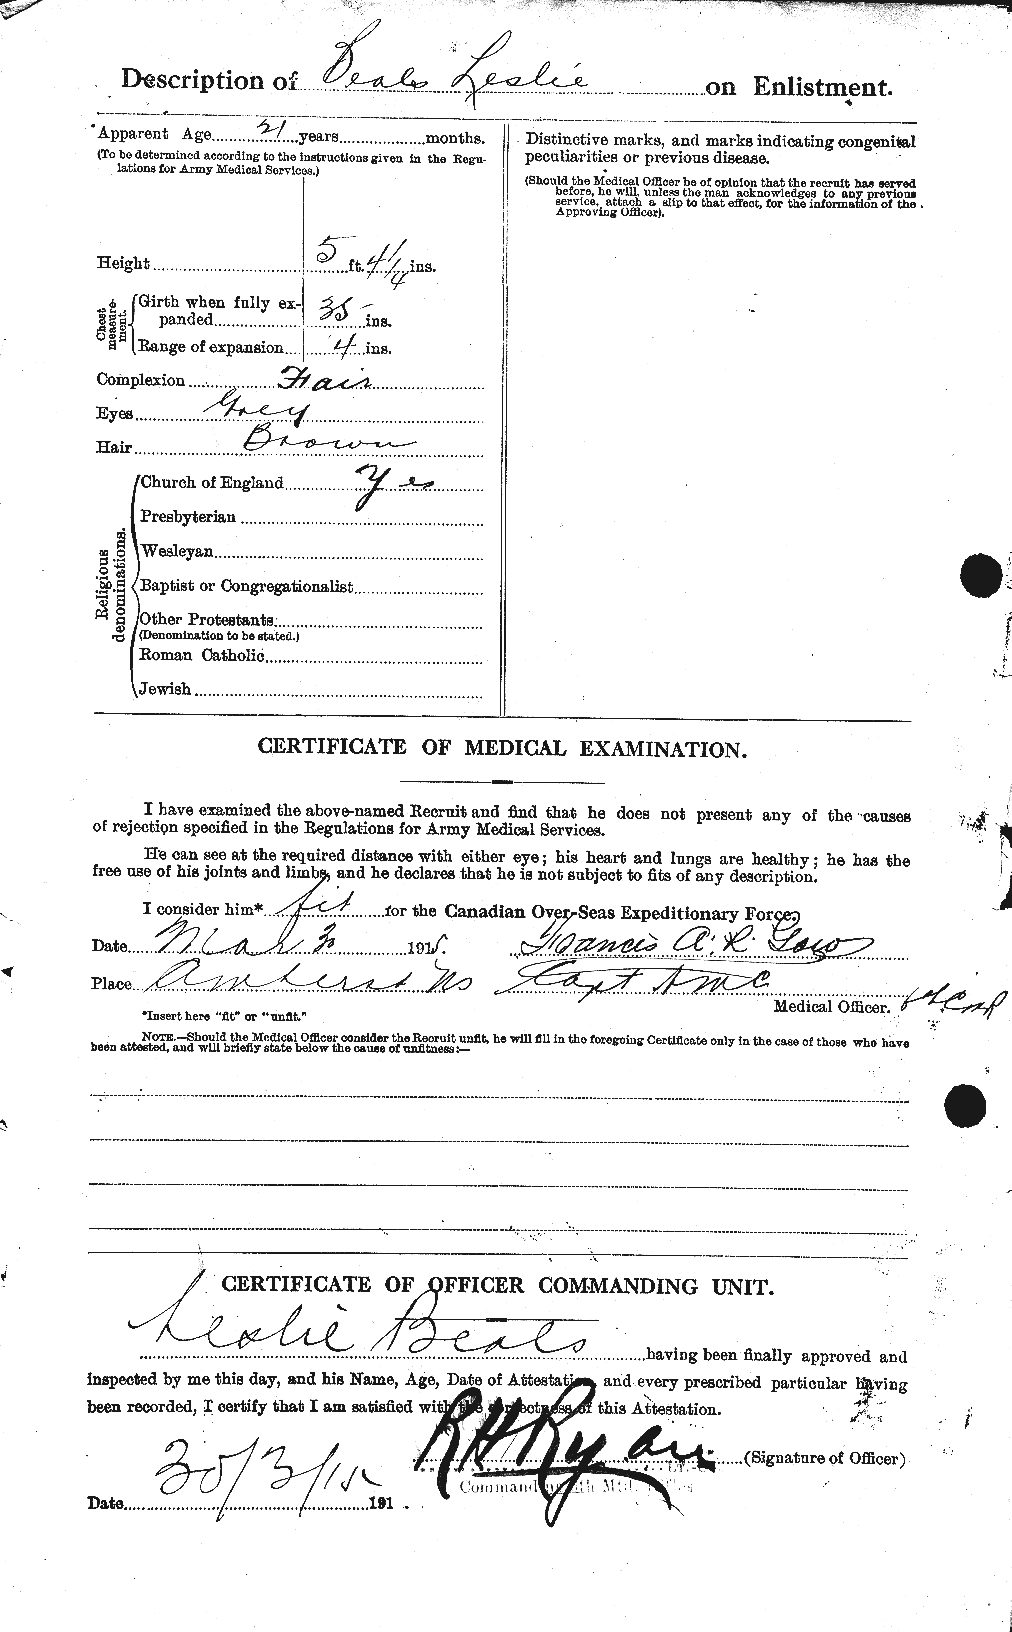 Personnel Records of the First World War - CEF 235393b